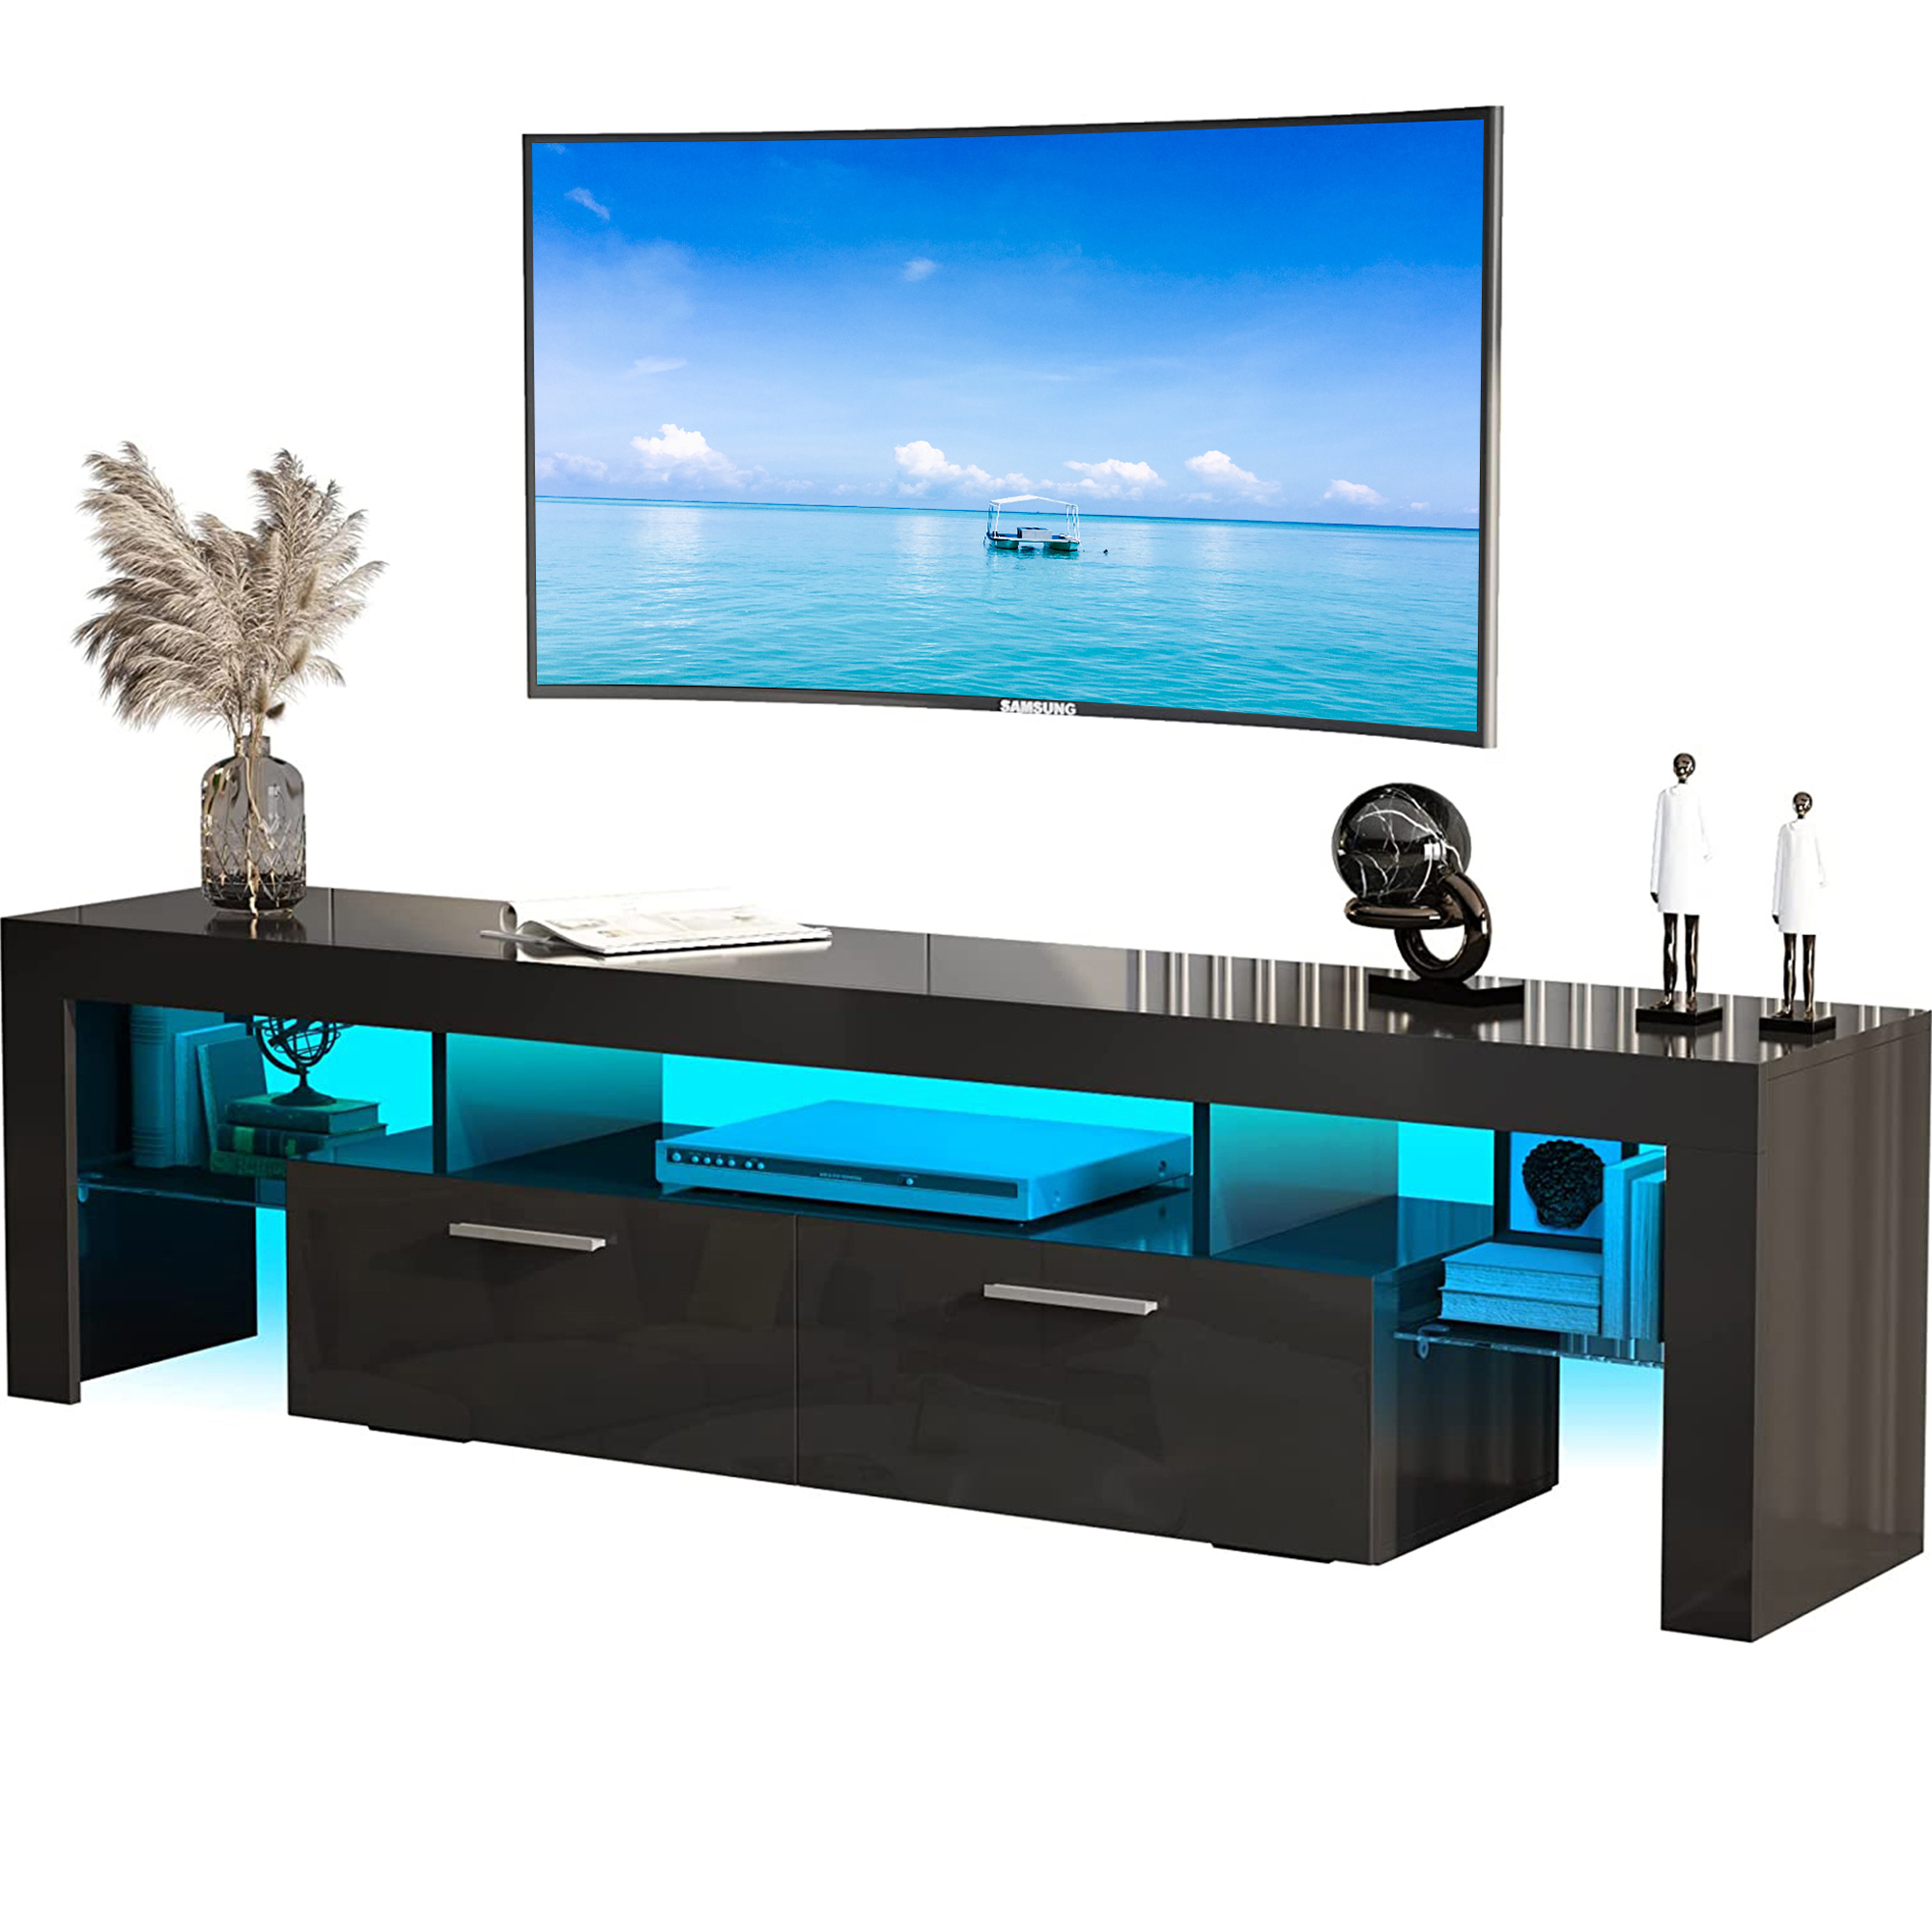 Black TV Stand for 70 inch TV, Modern High Glossy Television Table Stands TV Cabinet Console Table with 16 Colors LED Lights, TV Buffet Cabinet with Storage, Living Room Entertainment Center - image 2 of 13